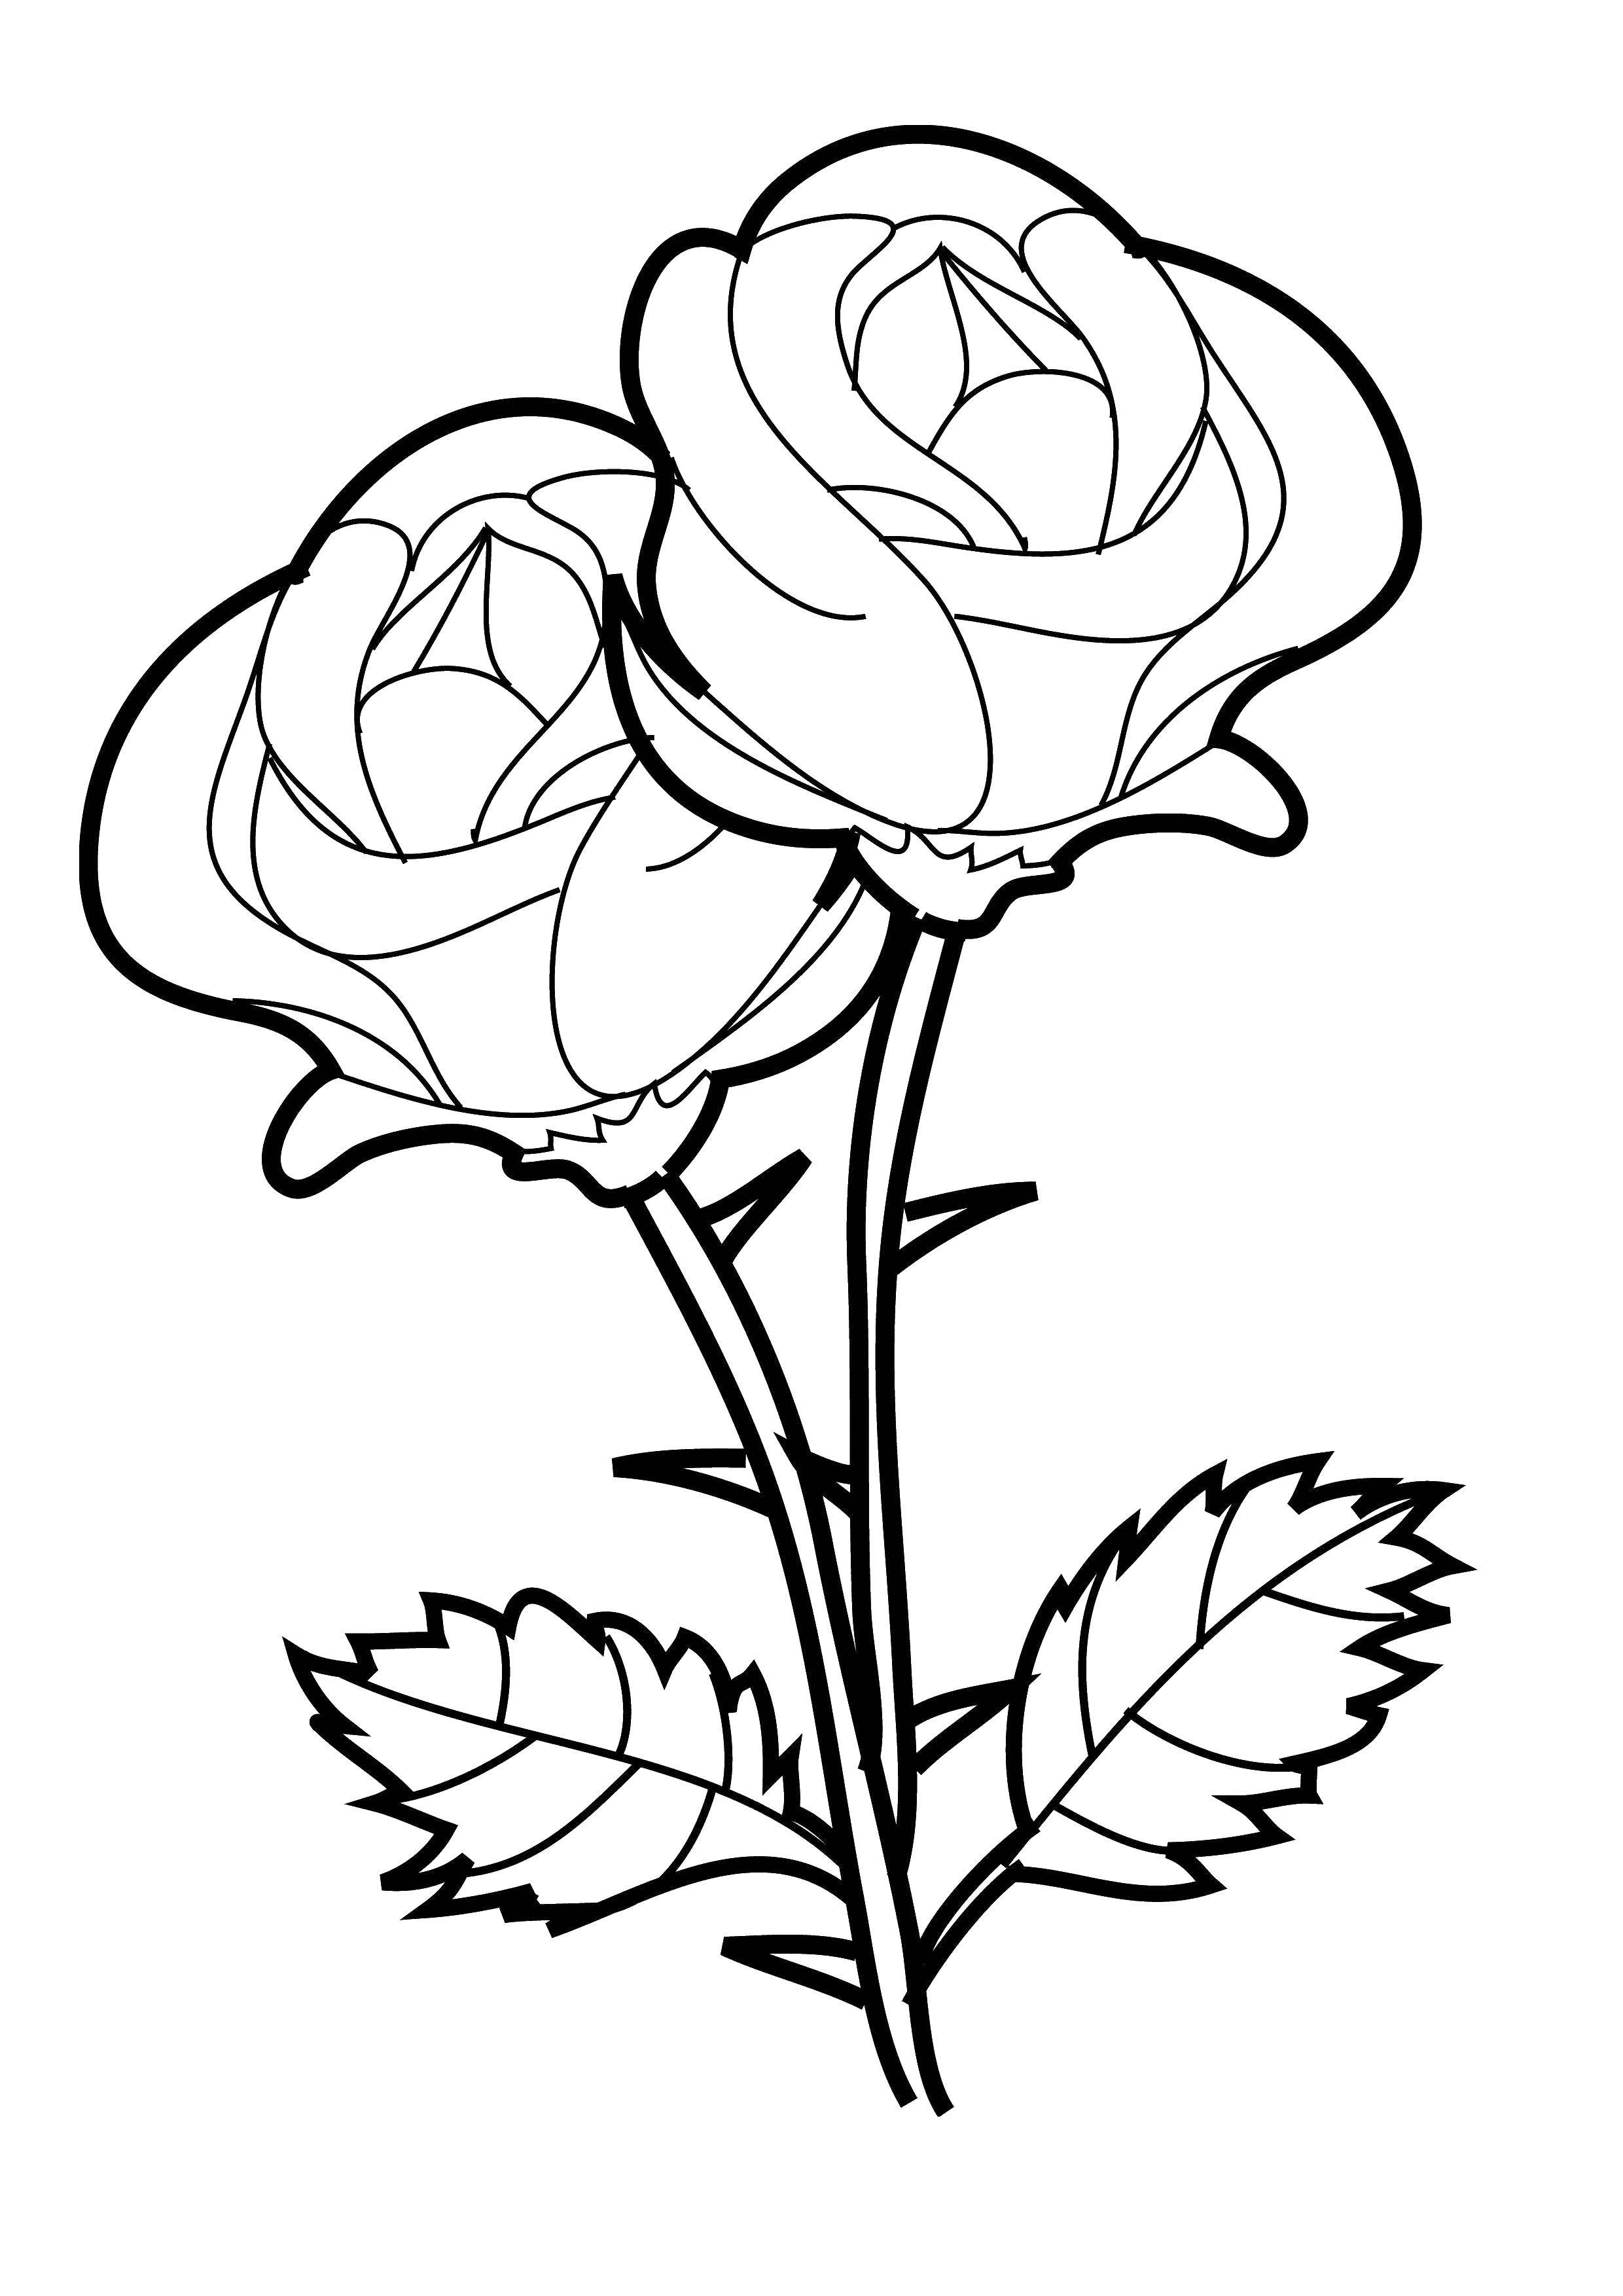 Coloring Flowers of roses. Category flowers. Tags:  bouquet of roses, thorn rose.